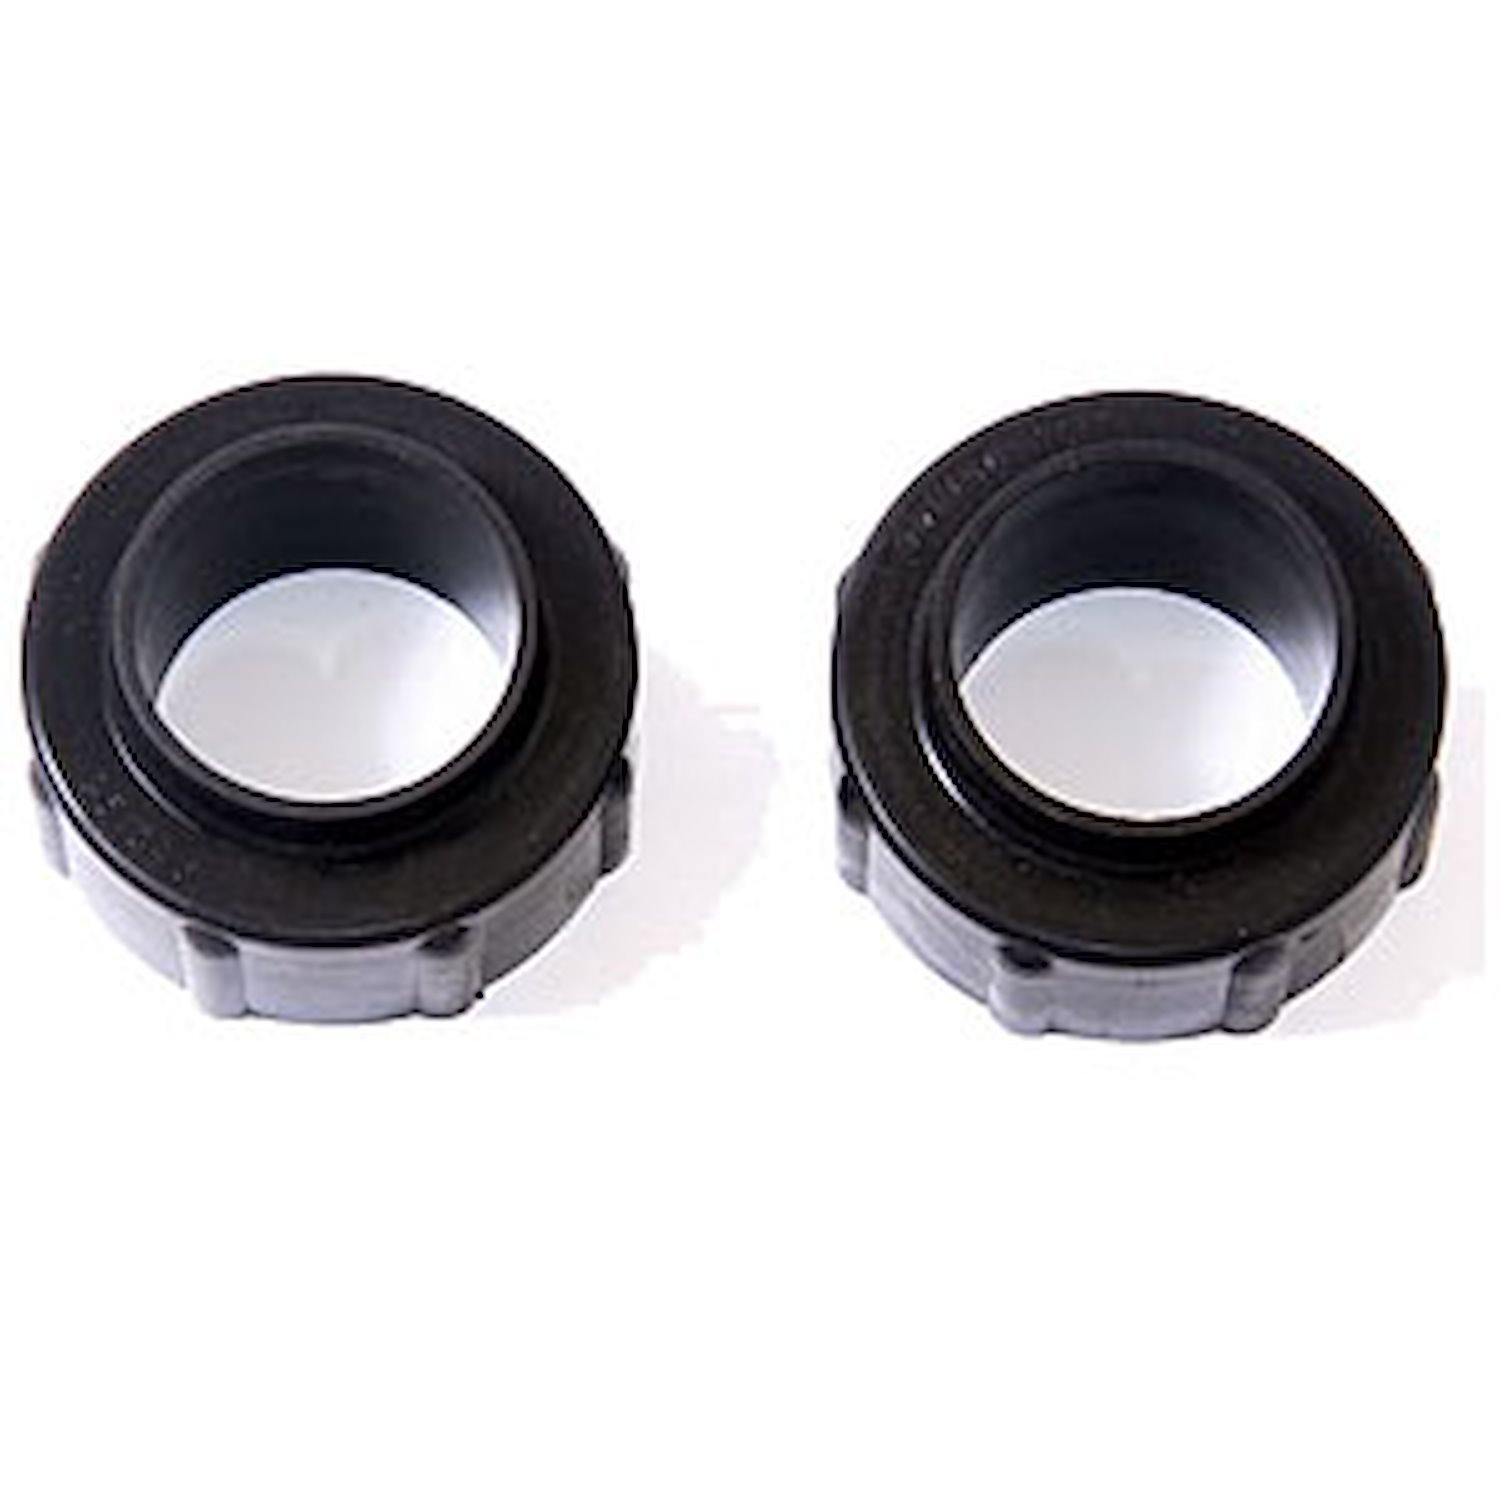 JL175PA Front Leveling Kit, Lift Amount: 1.75 in. Front/ Rear